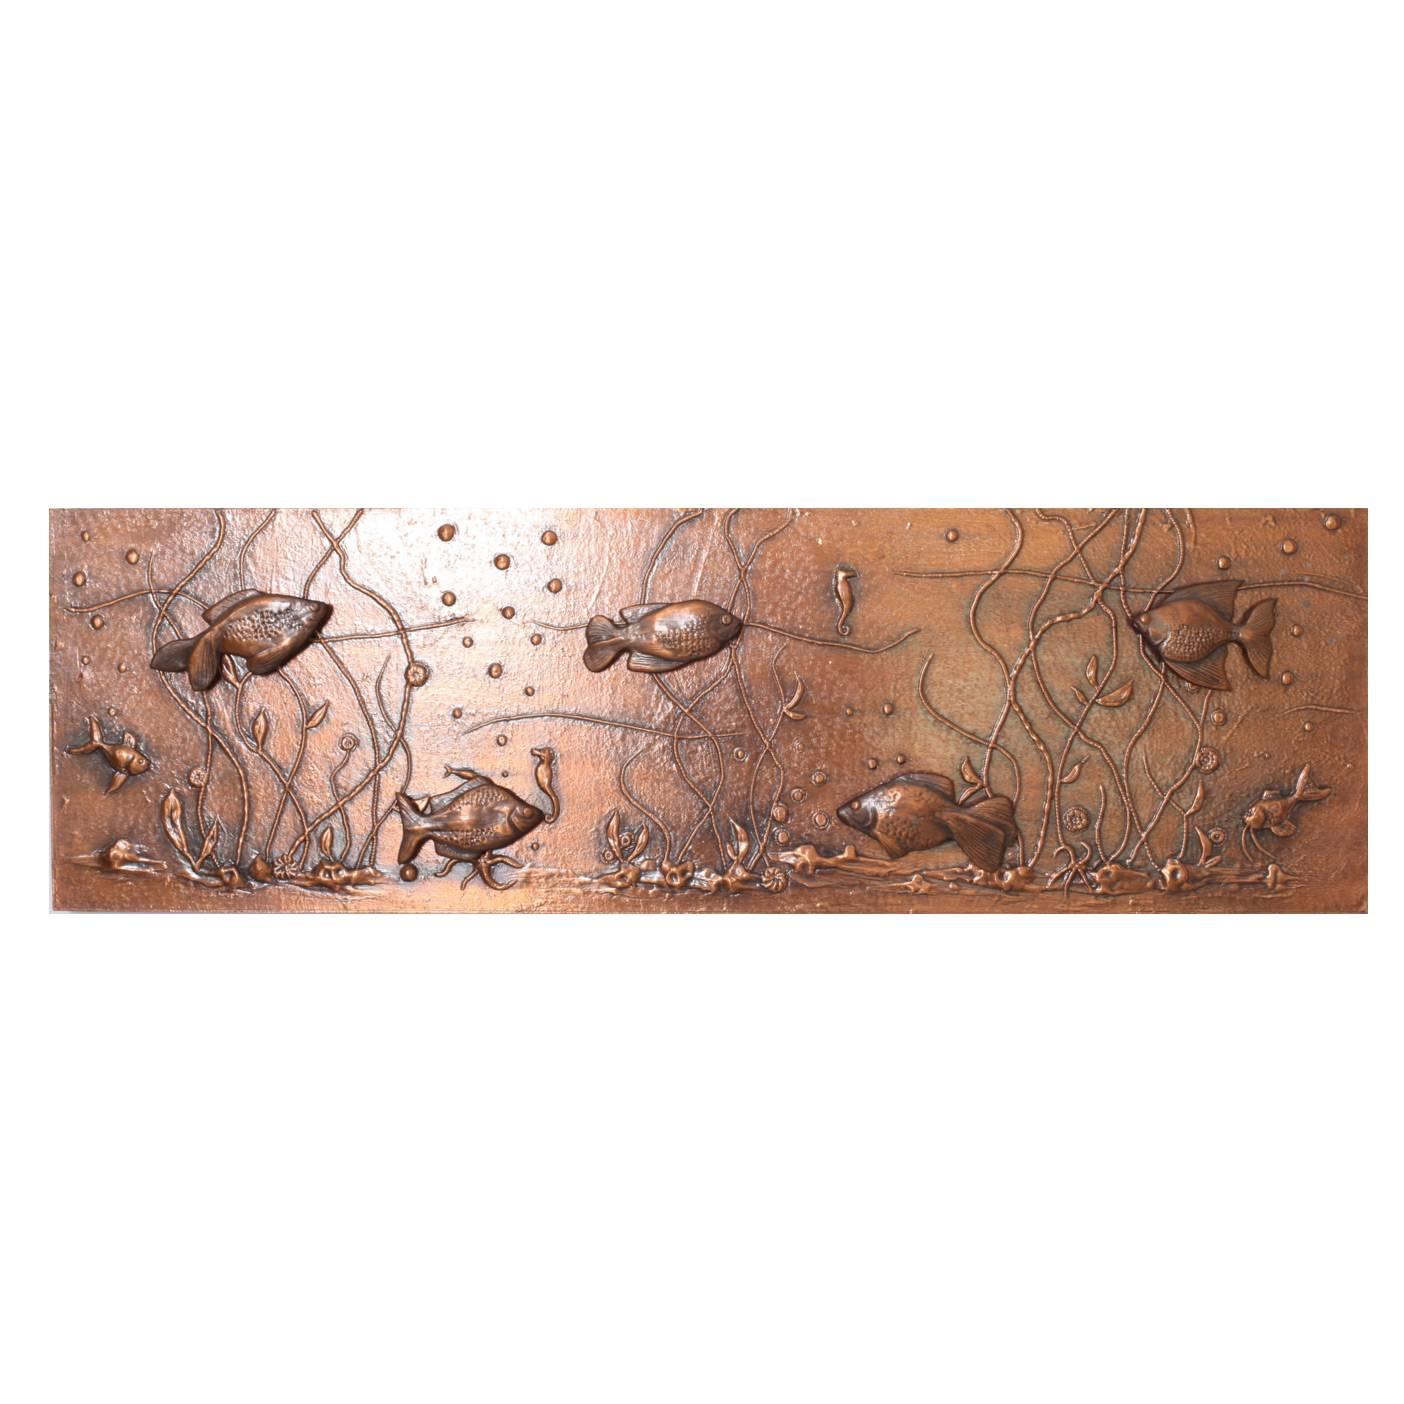 Huge Lighted Copper Wall Picture Panel or Object with Fishes